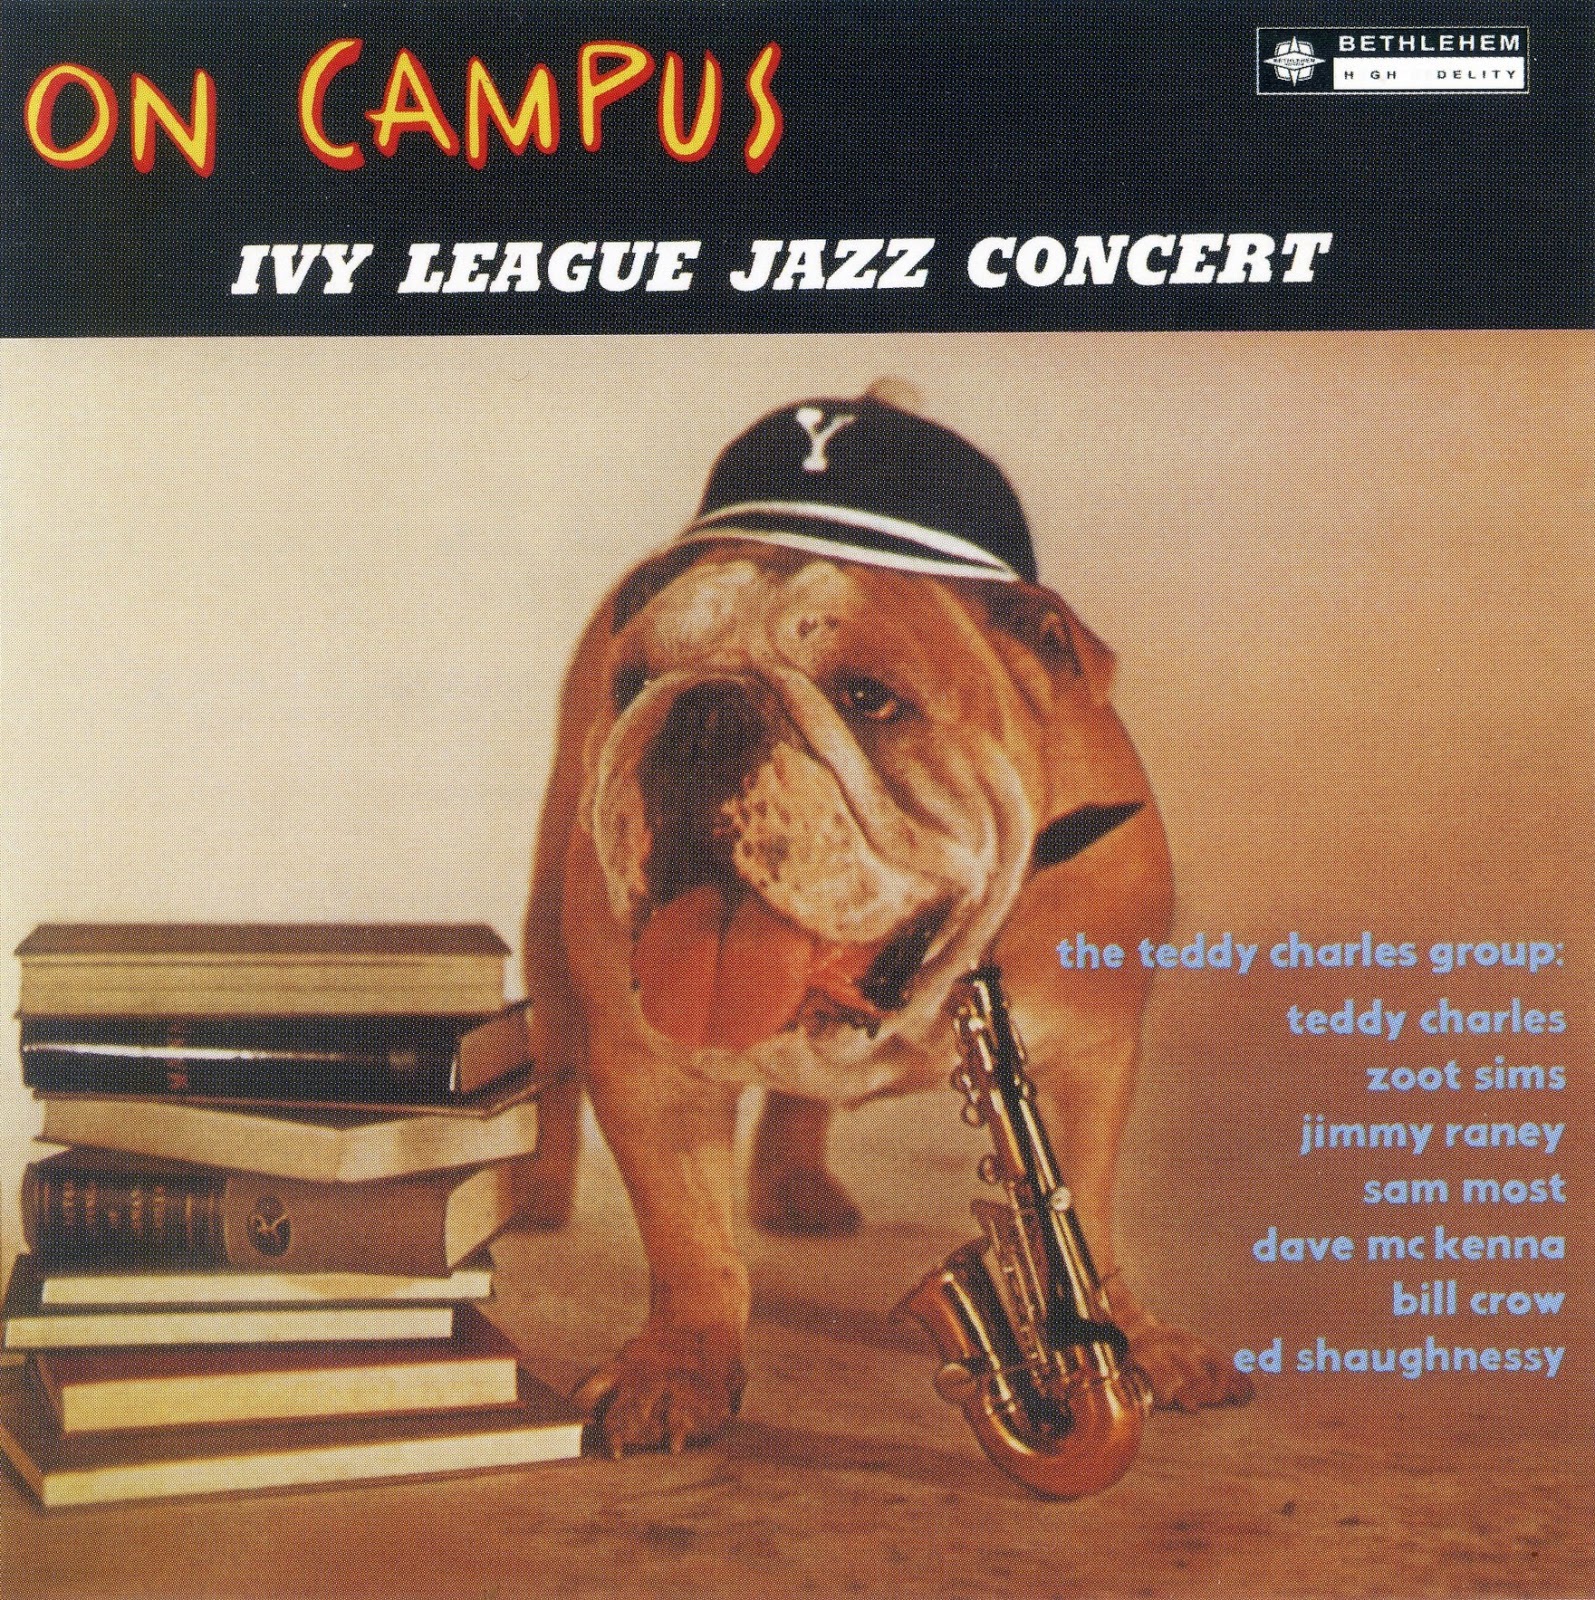 TEDDY CHARLES - On Campus, Ivy League Jazz Concert cover 